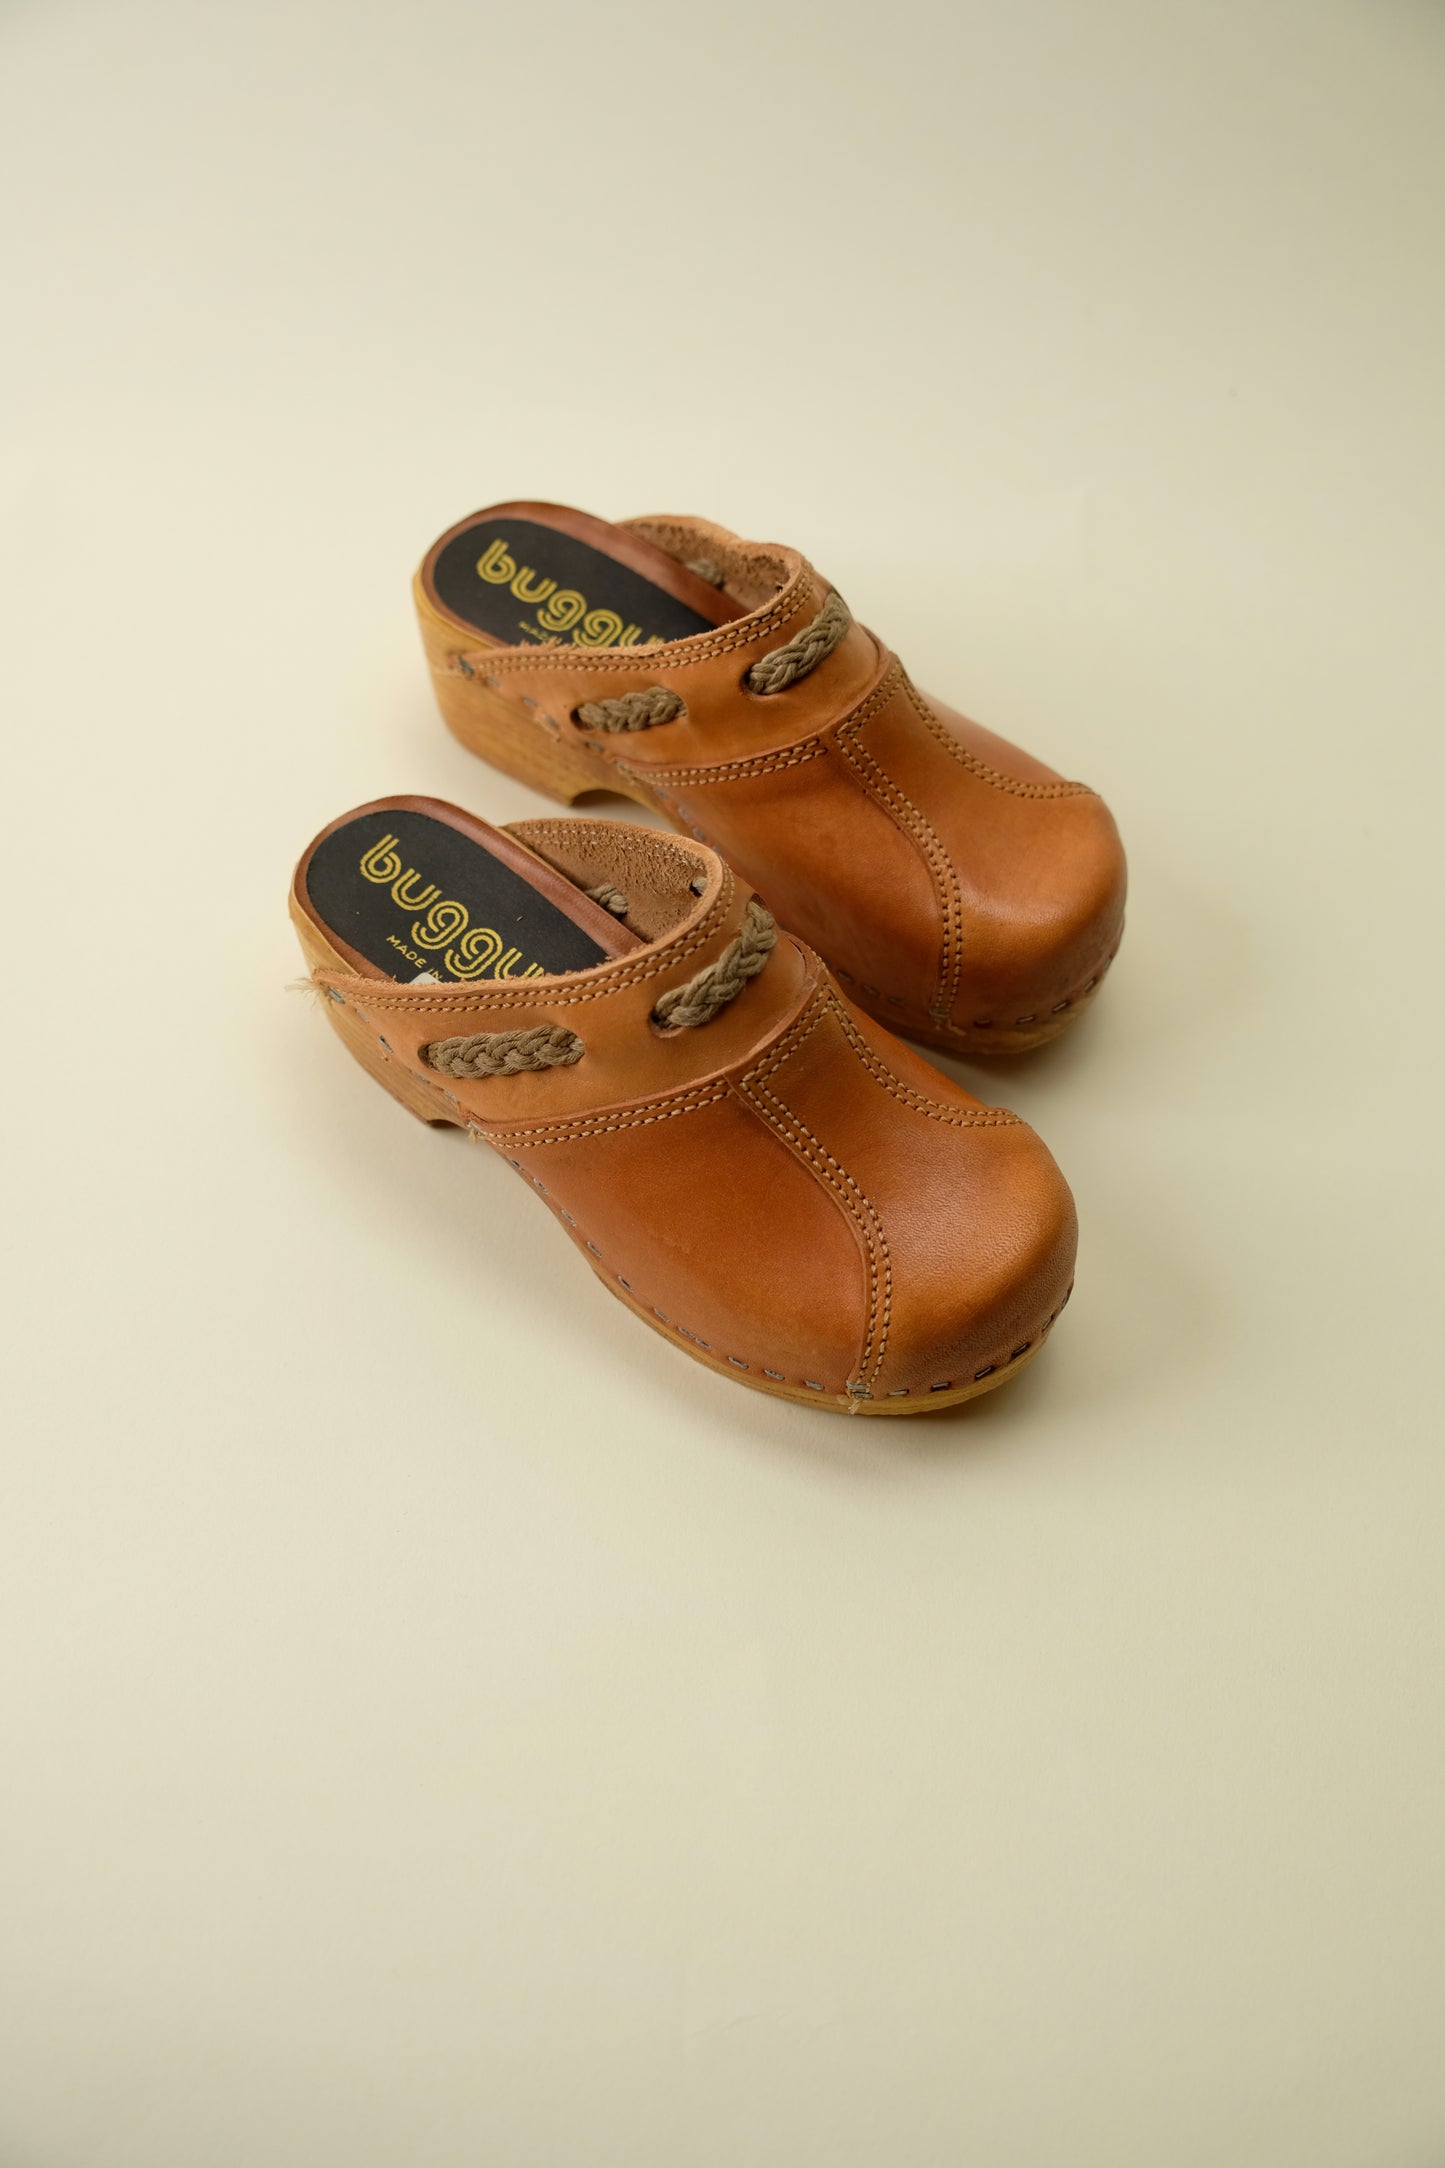 French Leather Clogs - Size 31